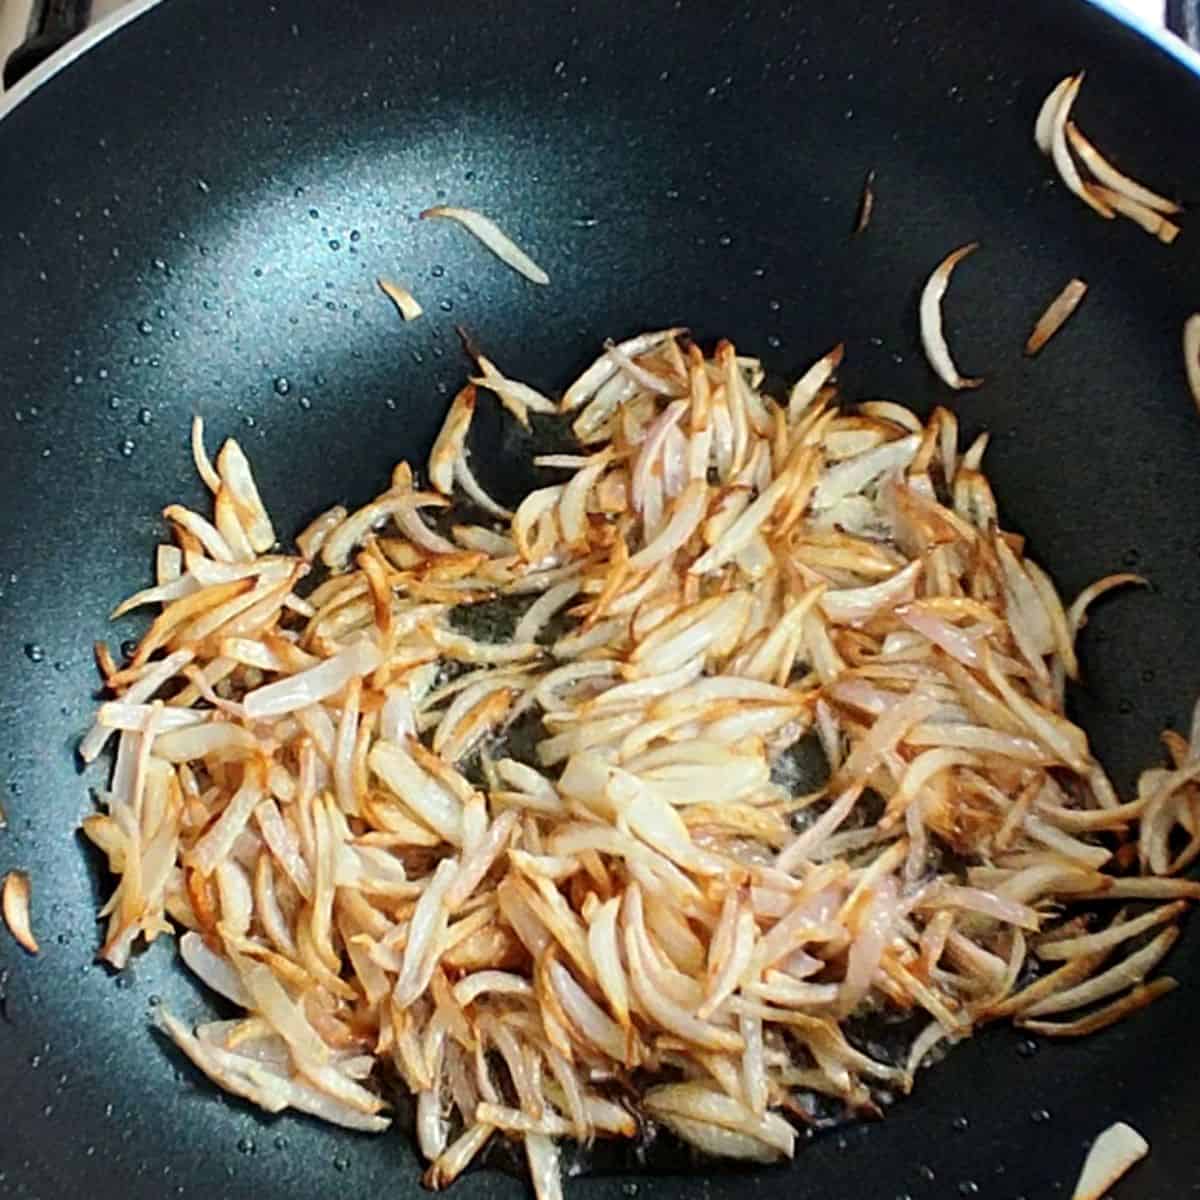 sauting onions until golden brown